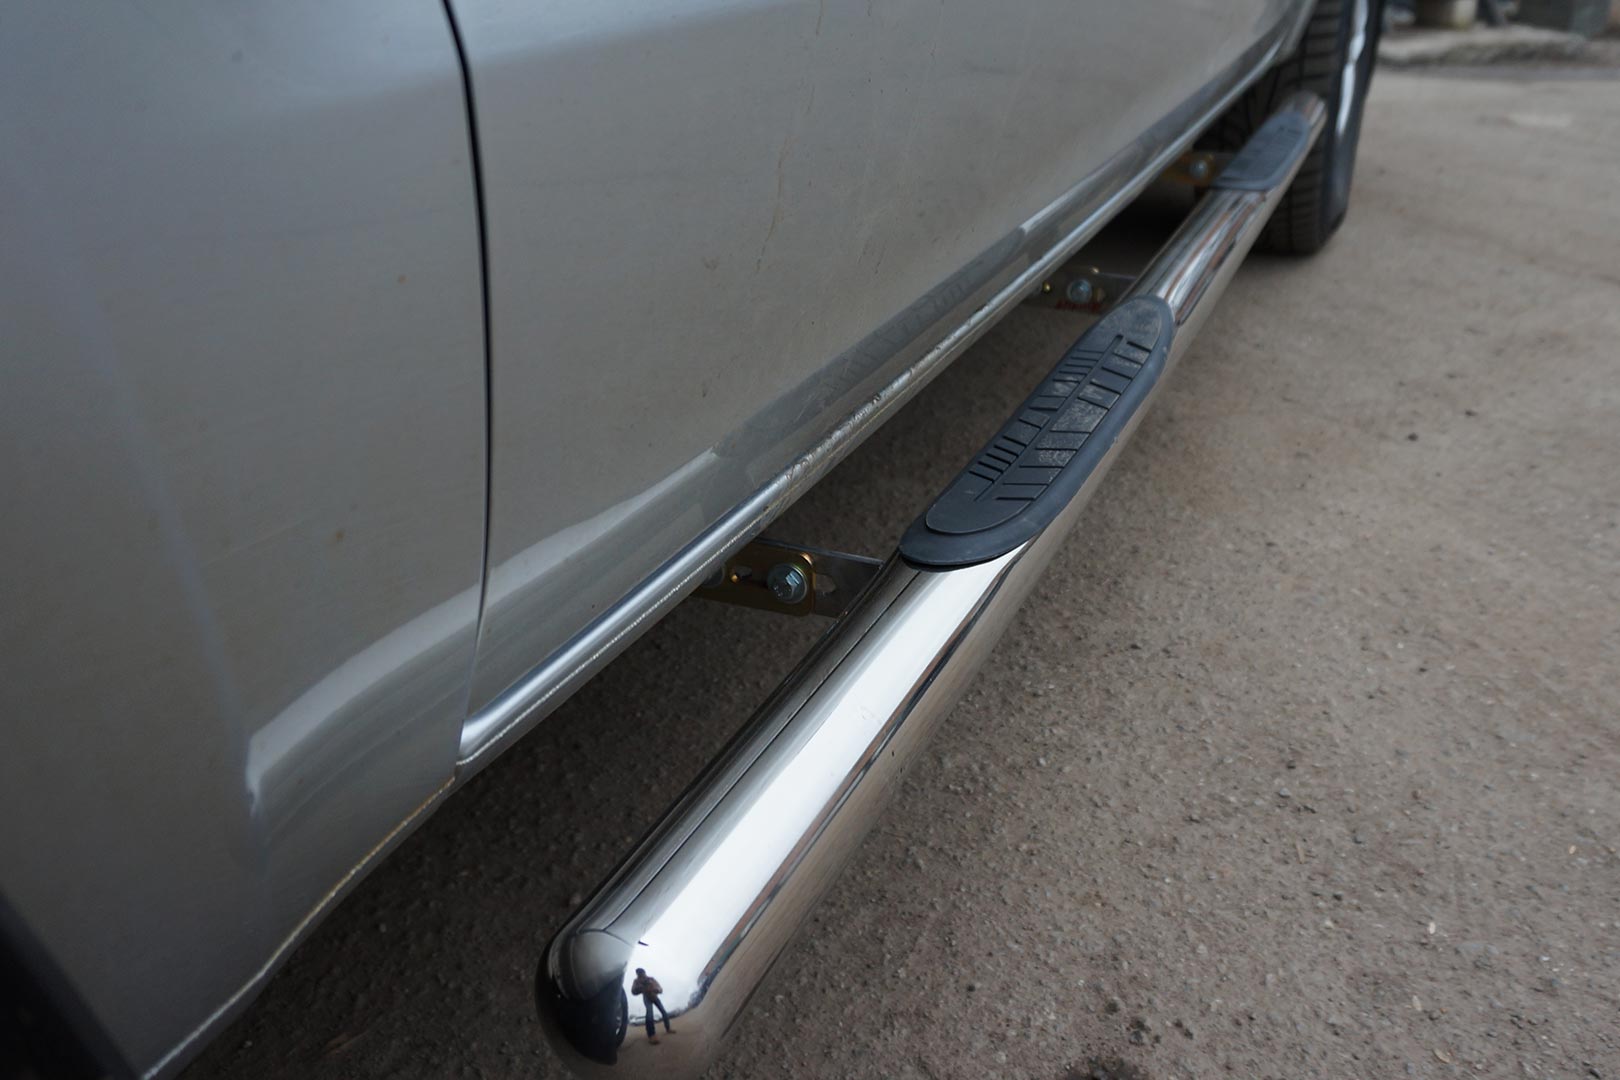 Tuning VW Amarok - installation of thresholds, bumper protection and hardtop